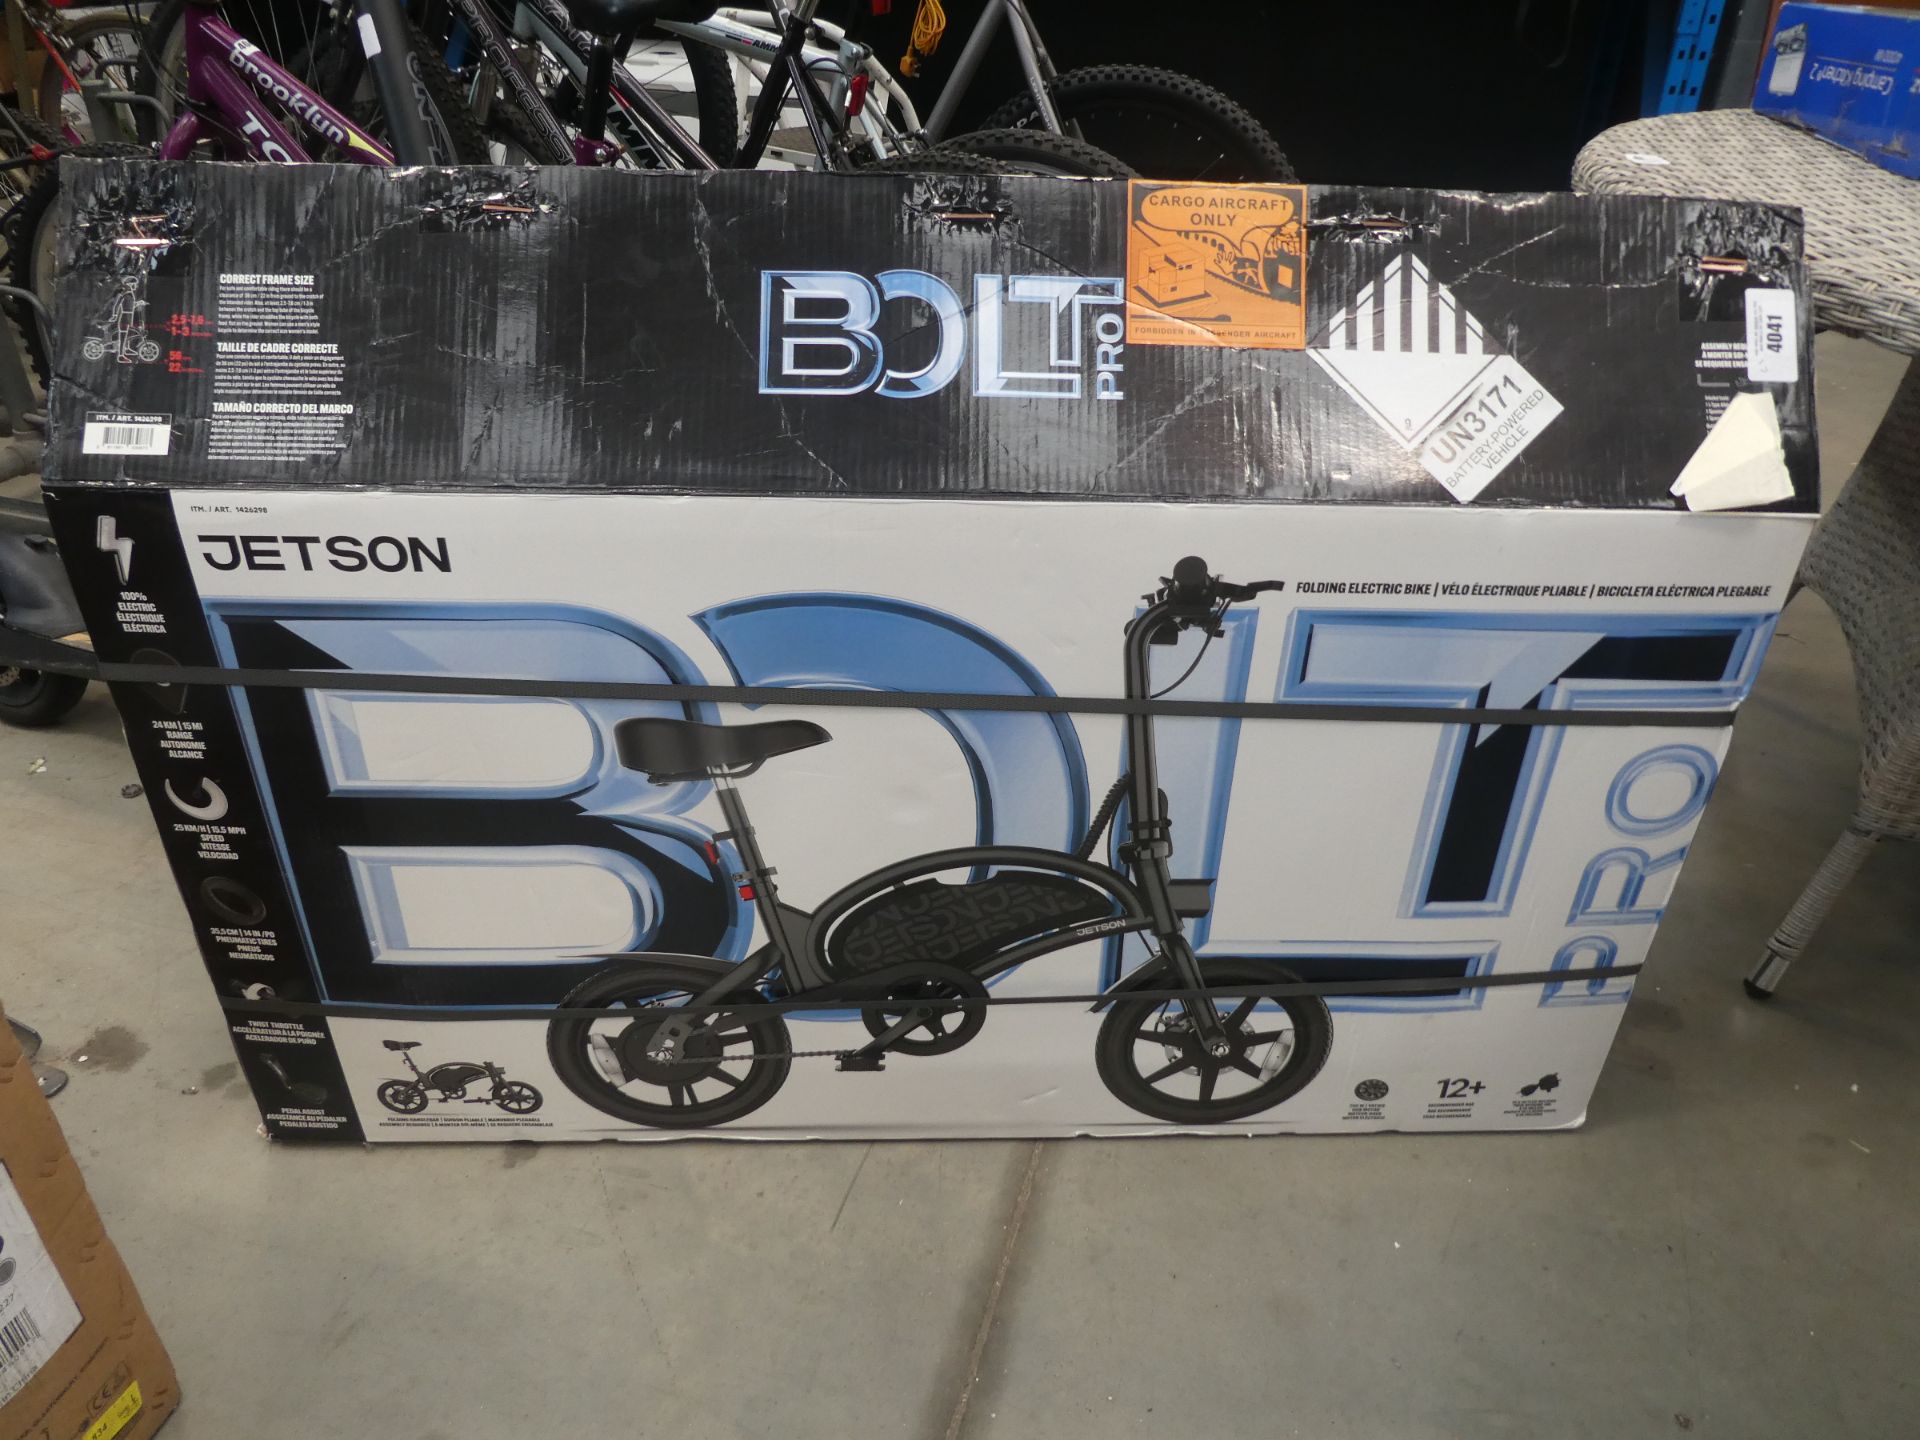 Bolt Pro electric bike (no charger)